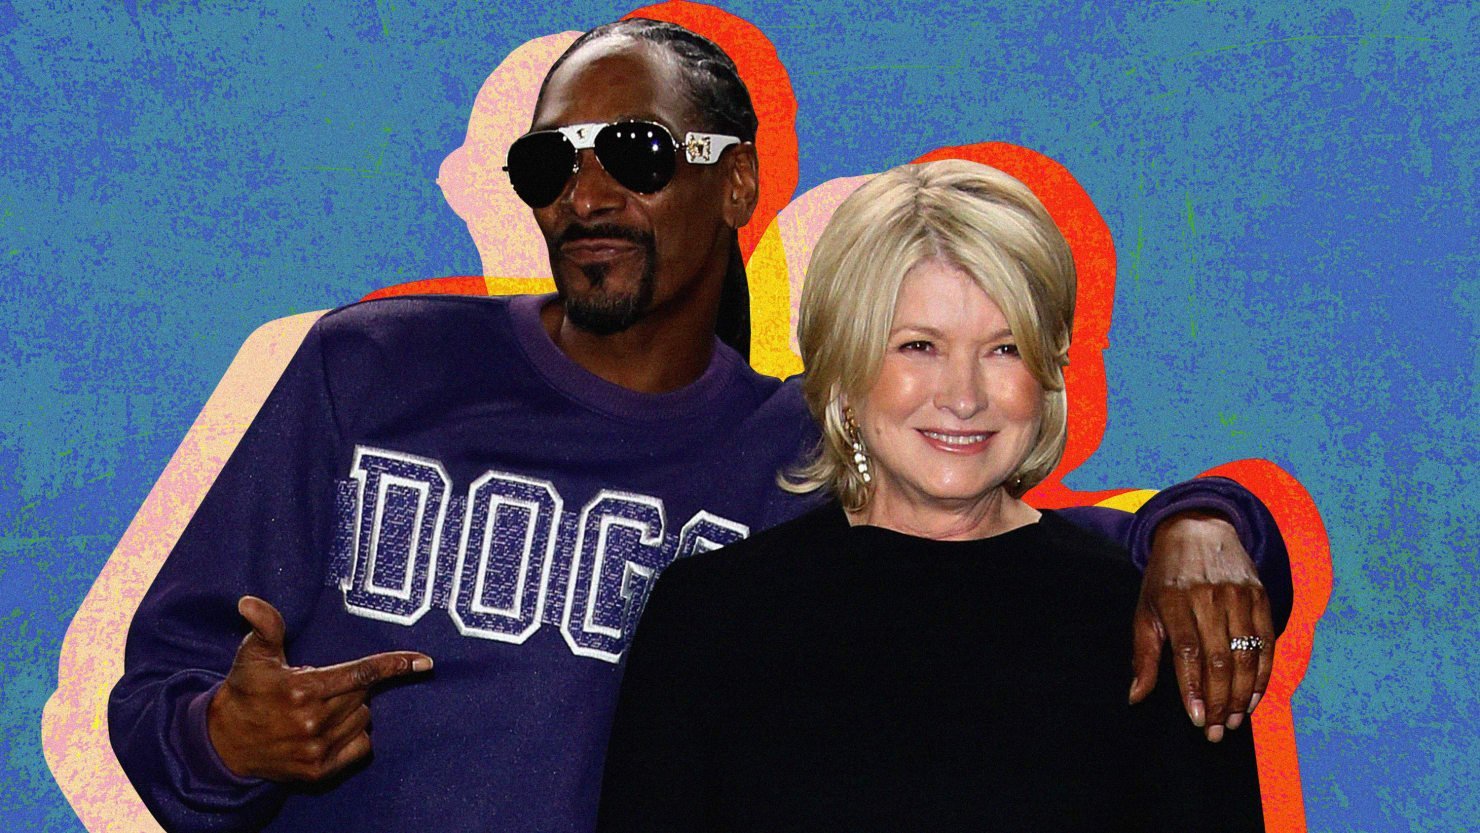 Snoop Dogg and Martha Stewart Dish on ‘Waking and Baking’ and Why Candy Corn Is 